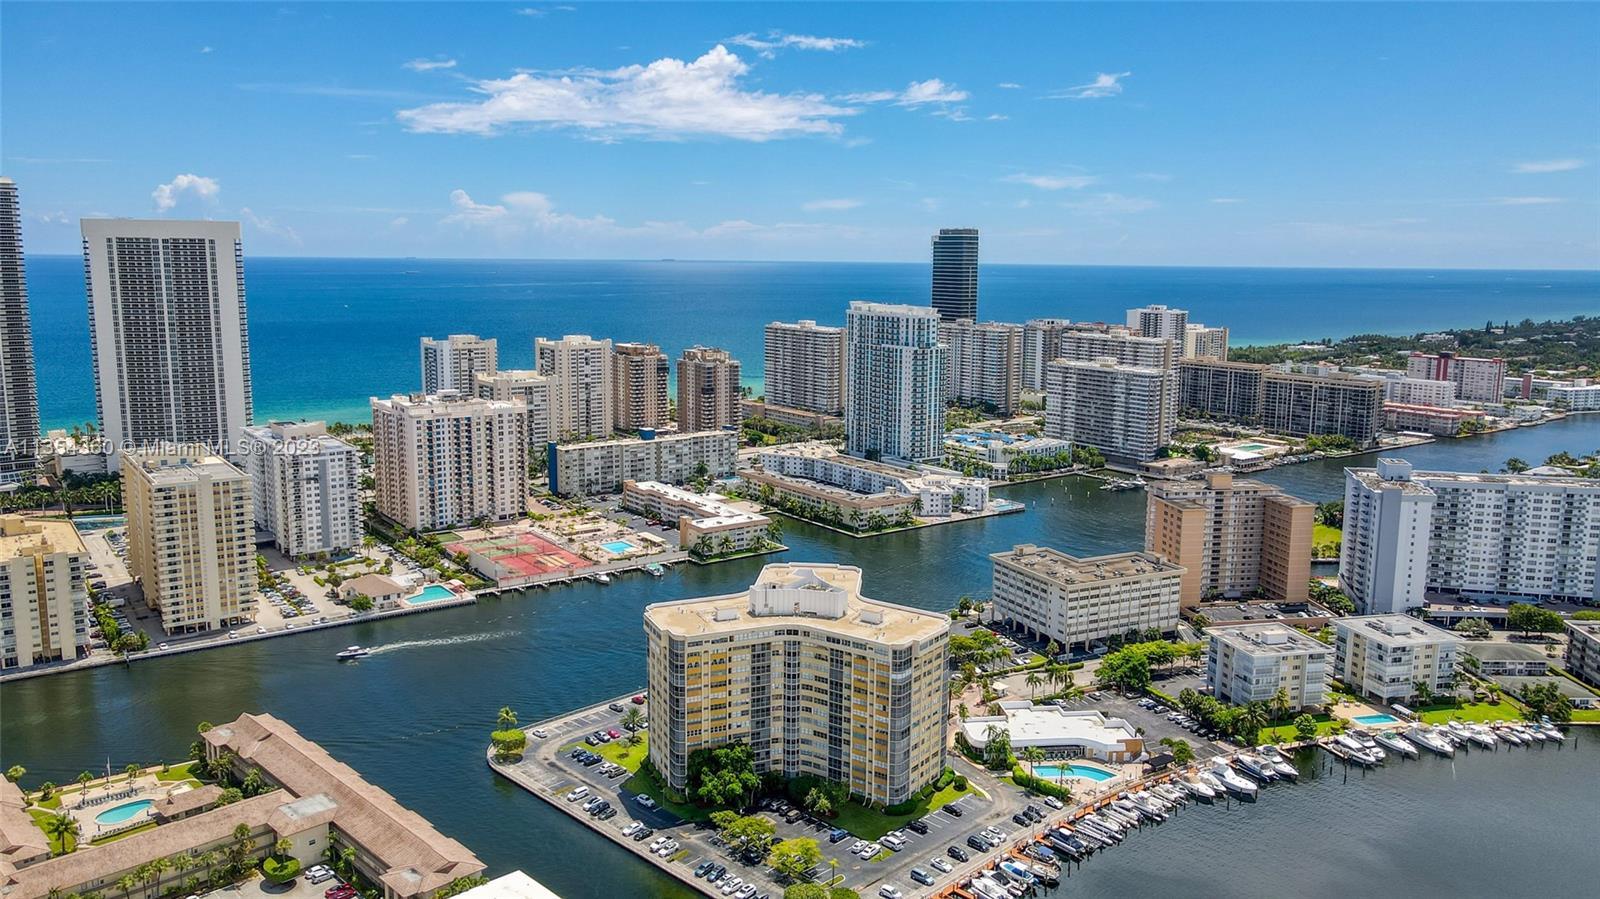 Lake Point Tower & Marina. Intercostal front, Hallandale Beach, point lot. One of the best locations